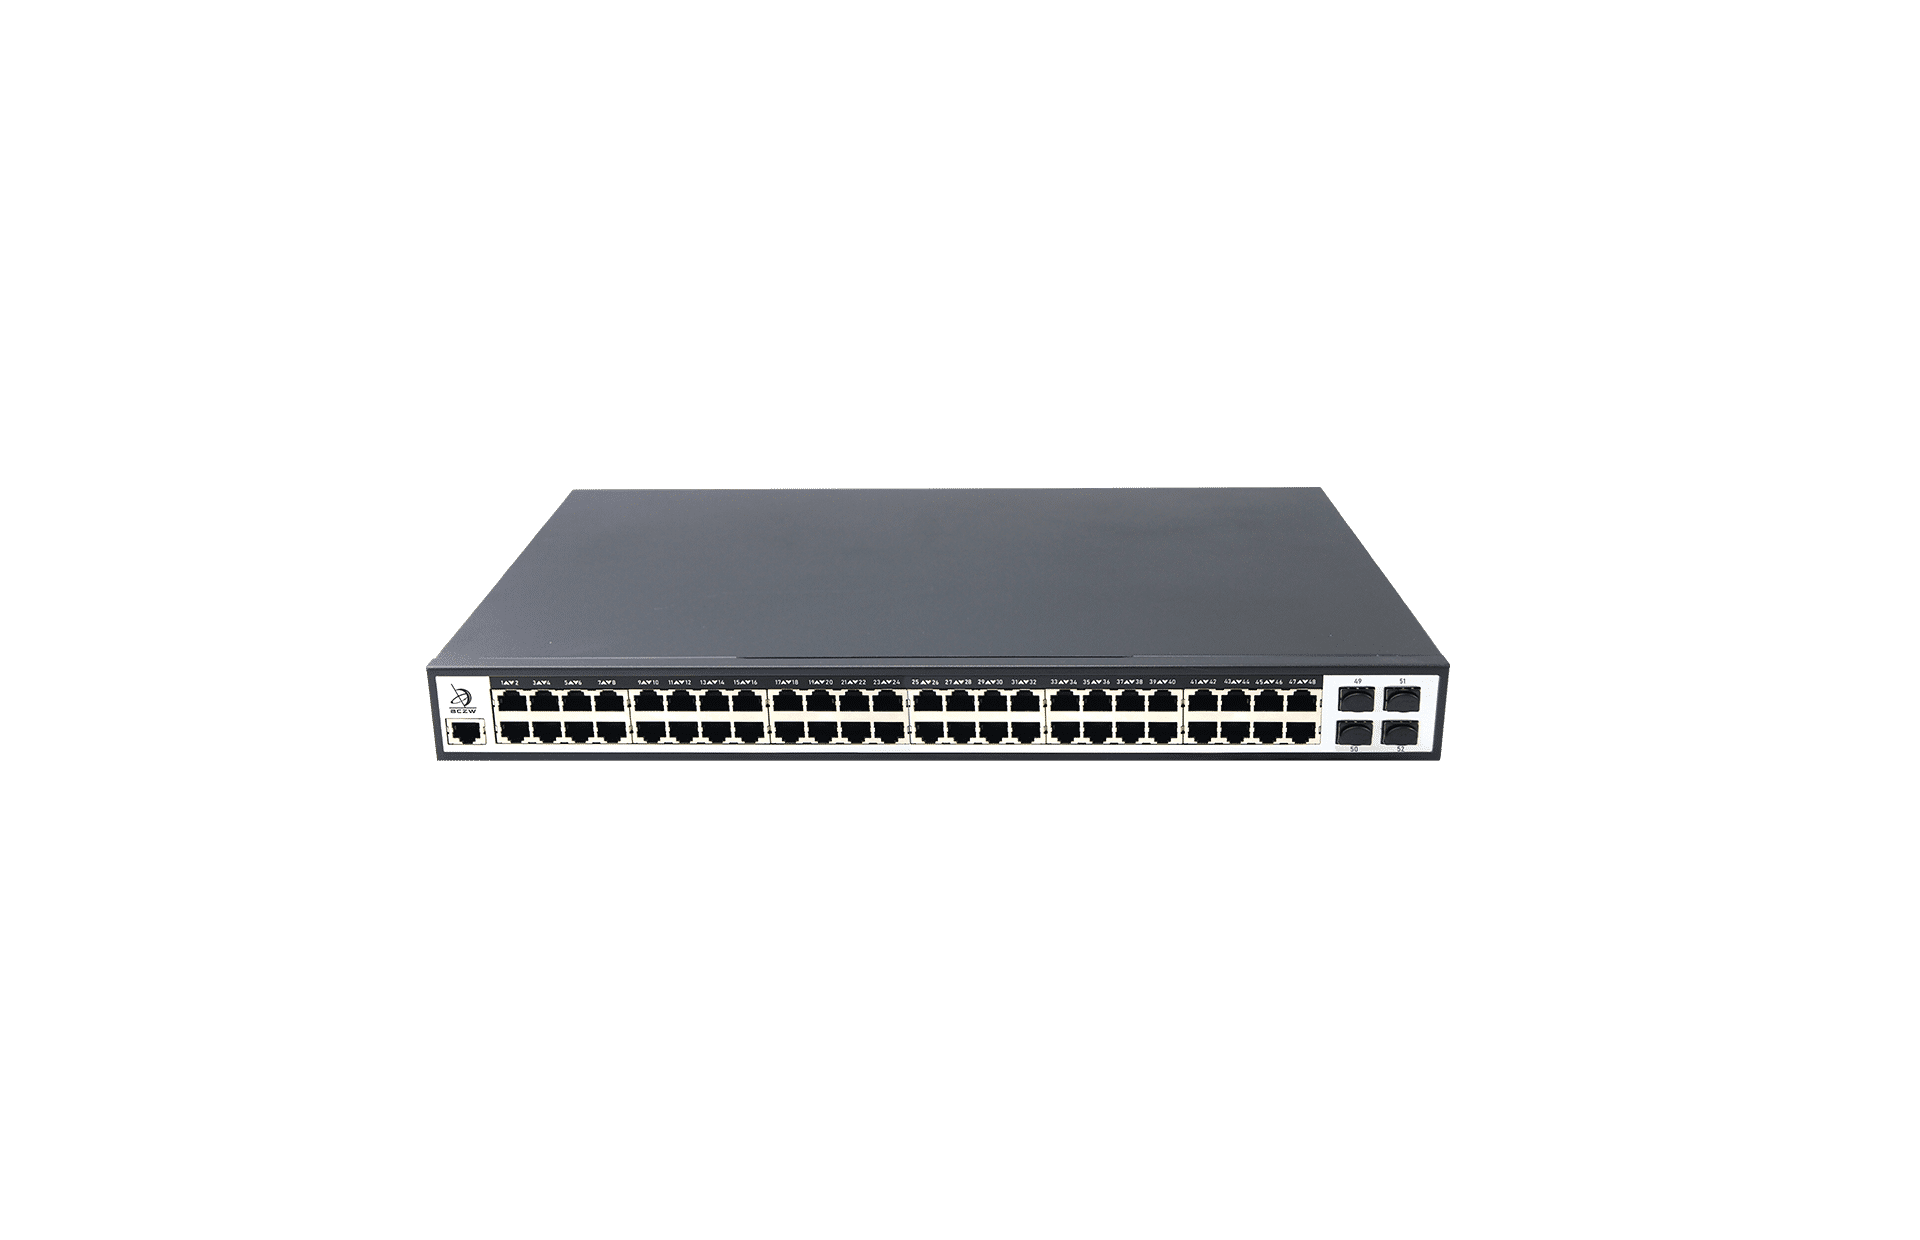 48 Ports 10/100/1000Mbps Managed PoE Switch with 4 Ports 2.5G SFP+